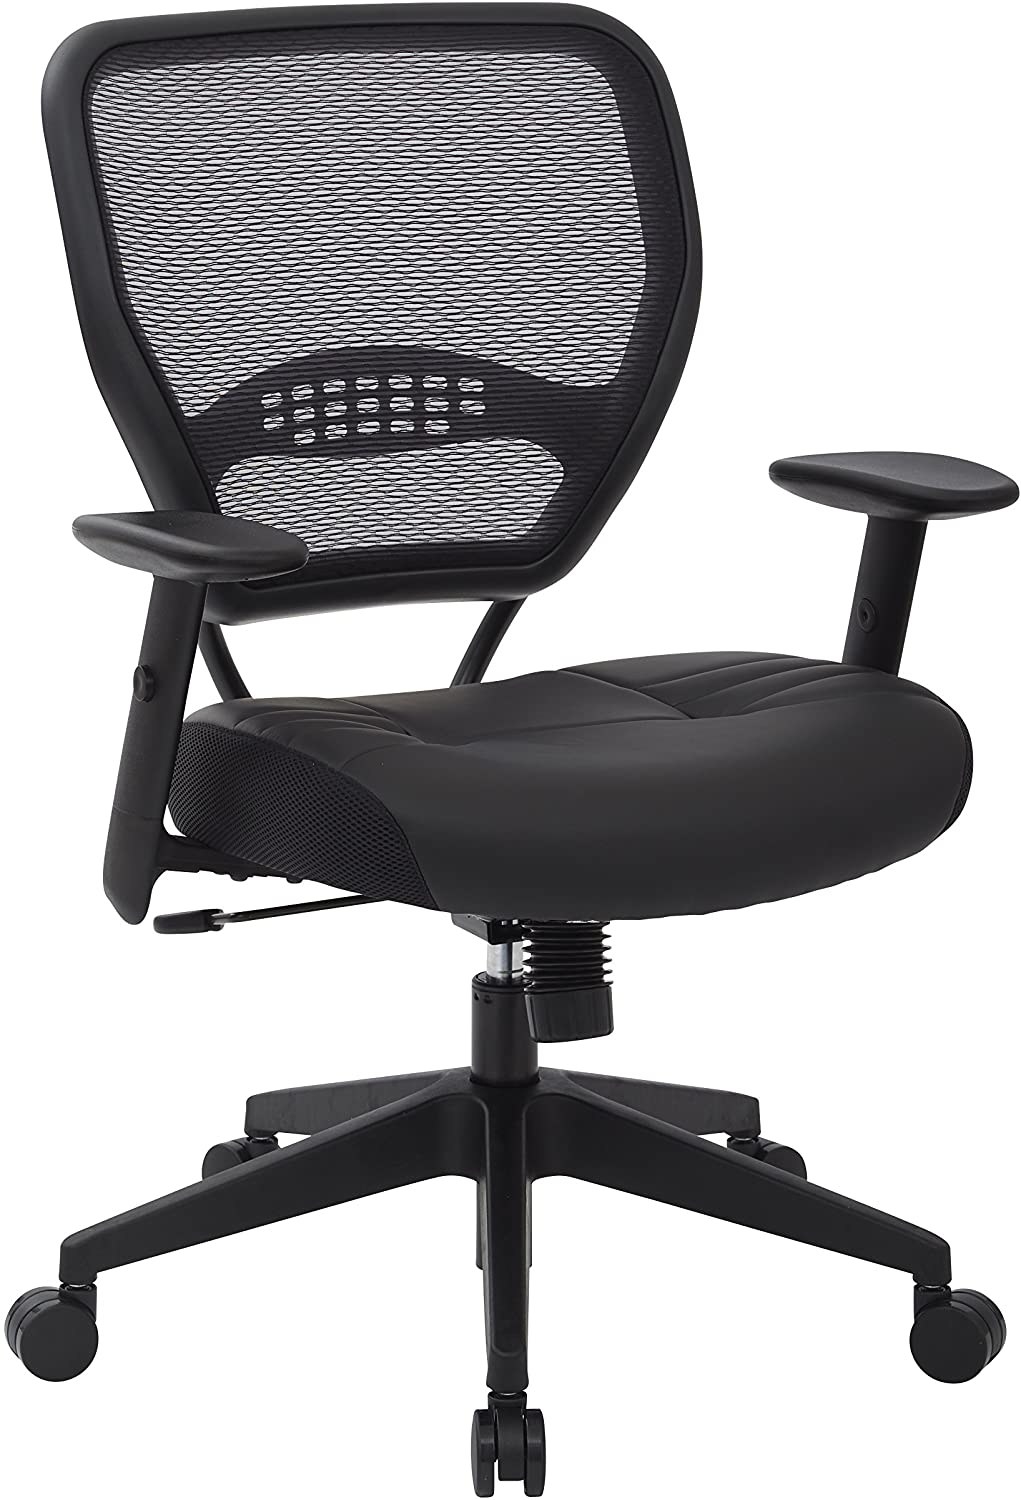 black rolling office chair with mesh back, padded arm rests, leather seat